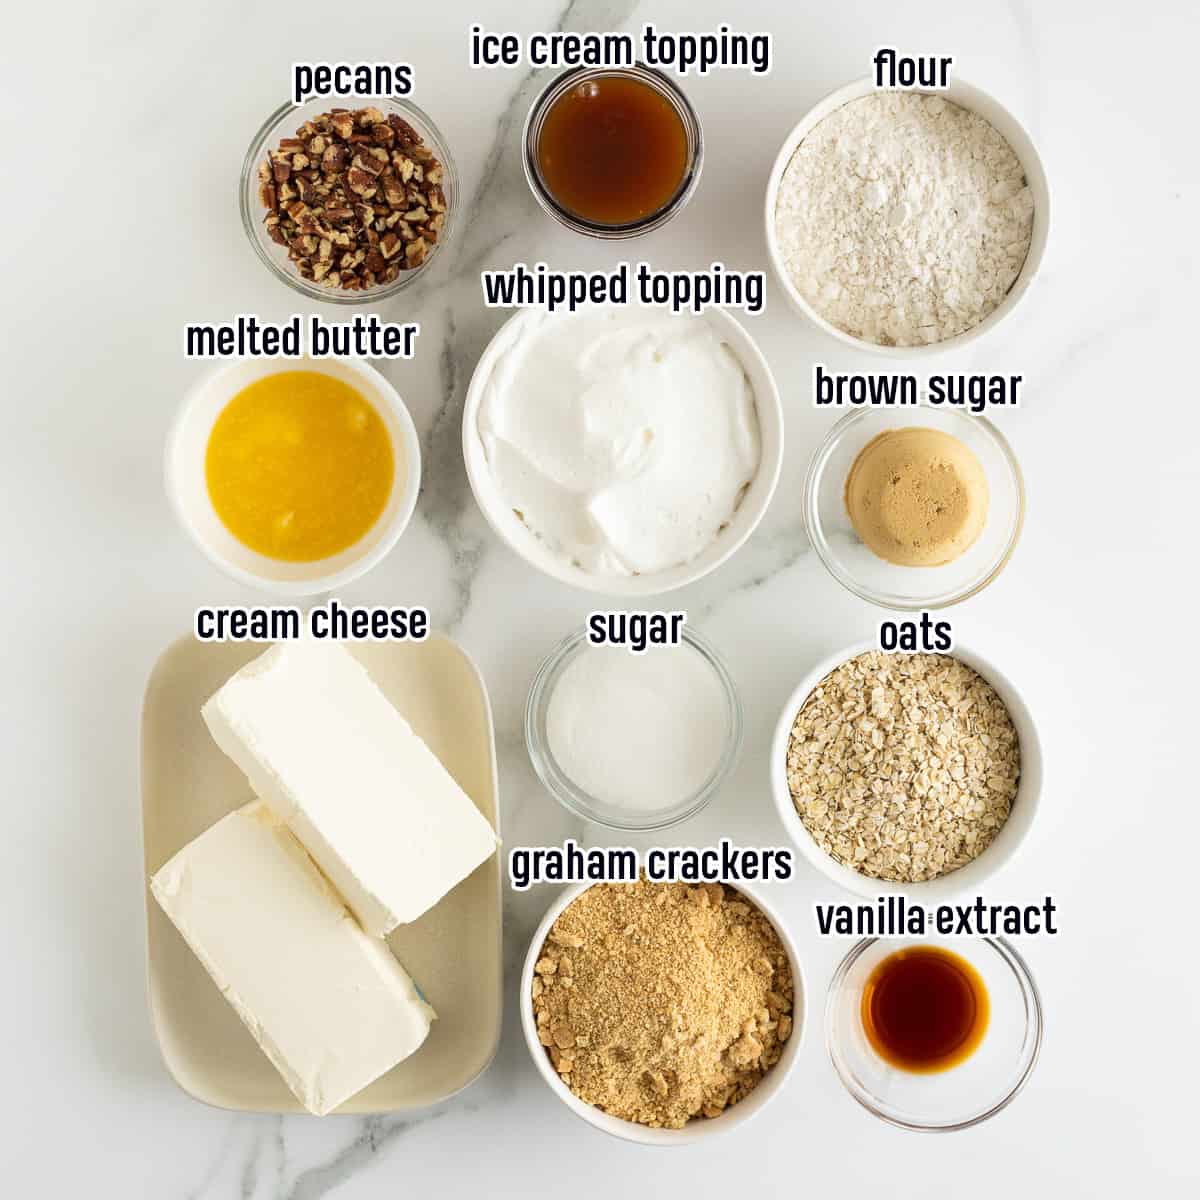 Cream cheese, melted butter, oats, brown sugar and other ingredients in bowls with text.